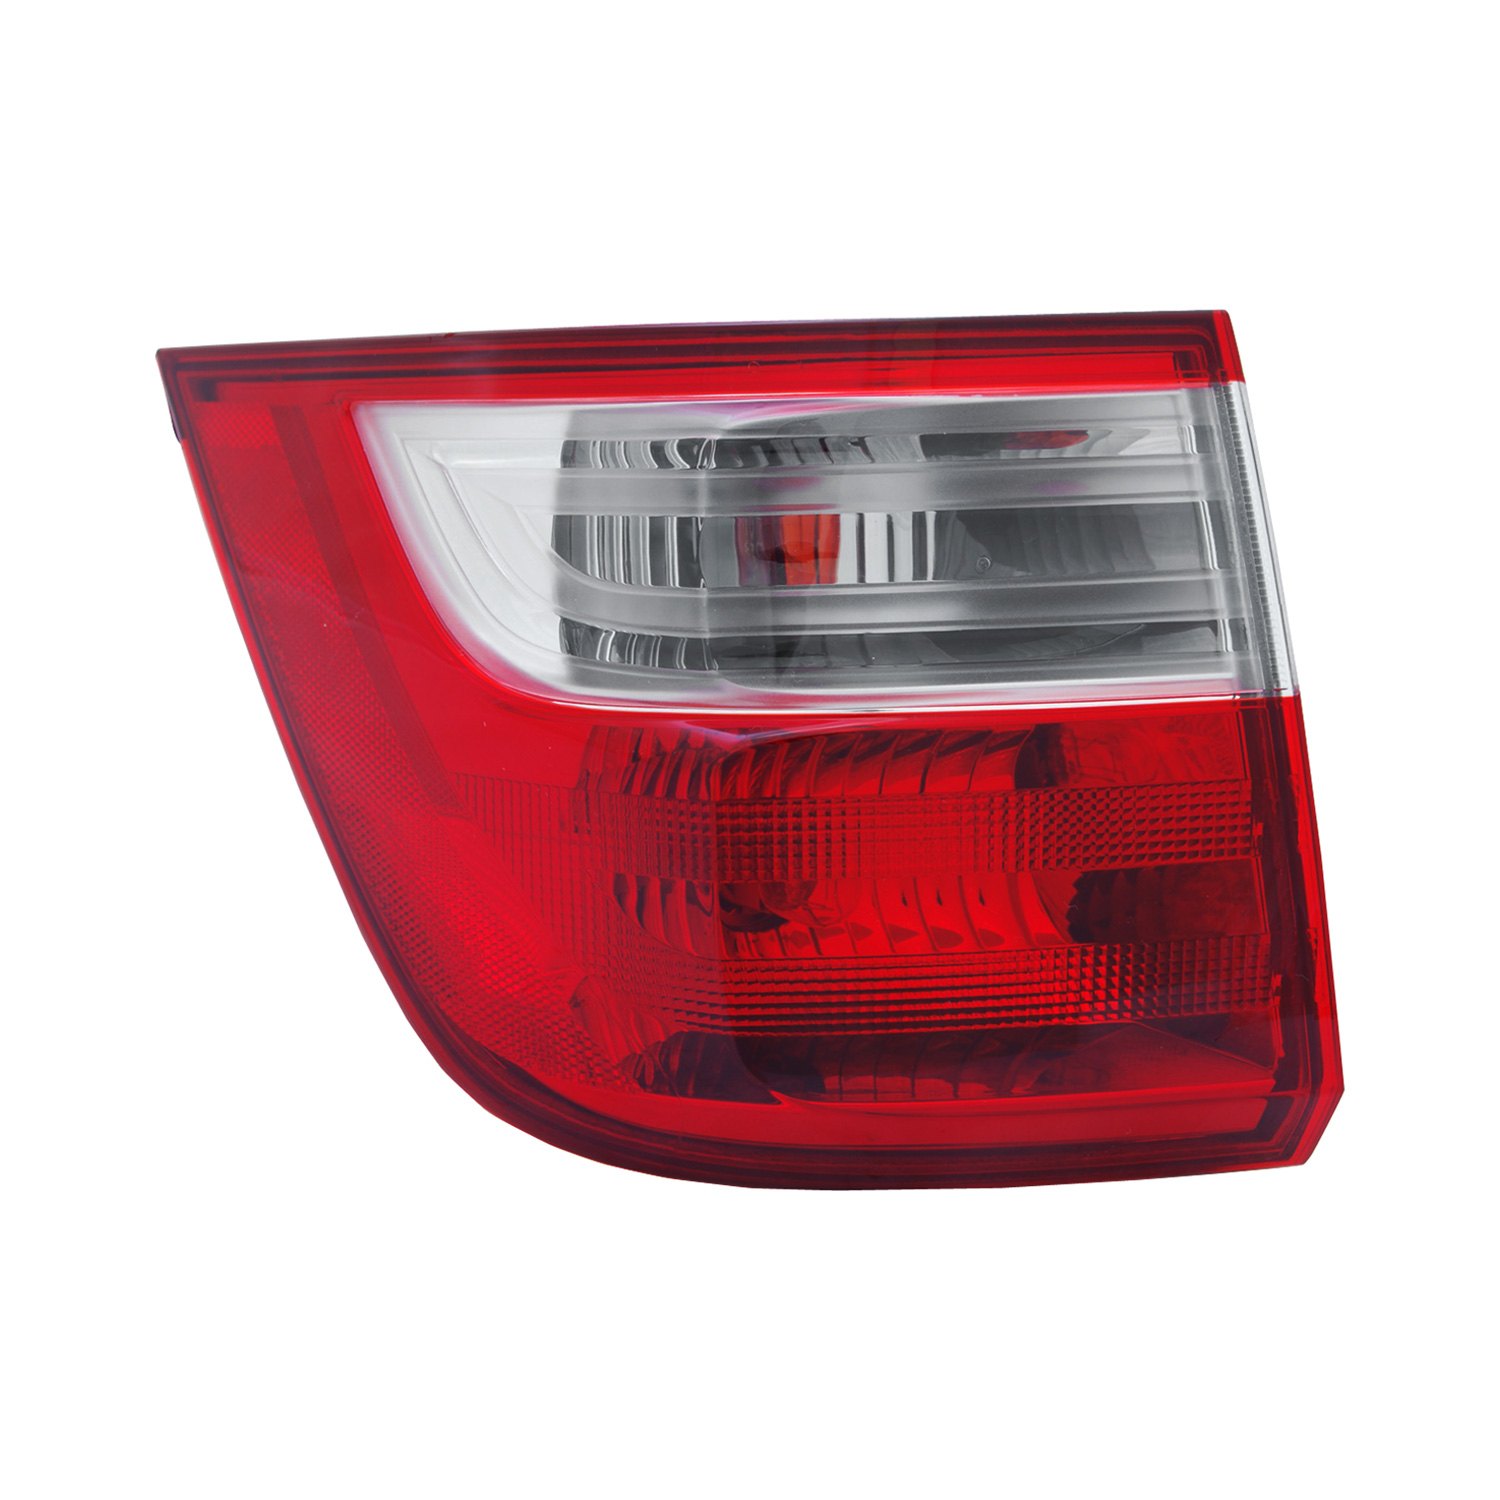 TruParts® - Honda Odyssey 2012 Replacement Tail Light 2012 Honda Odyssey Tail Light Bulb Replacement